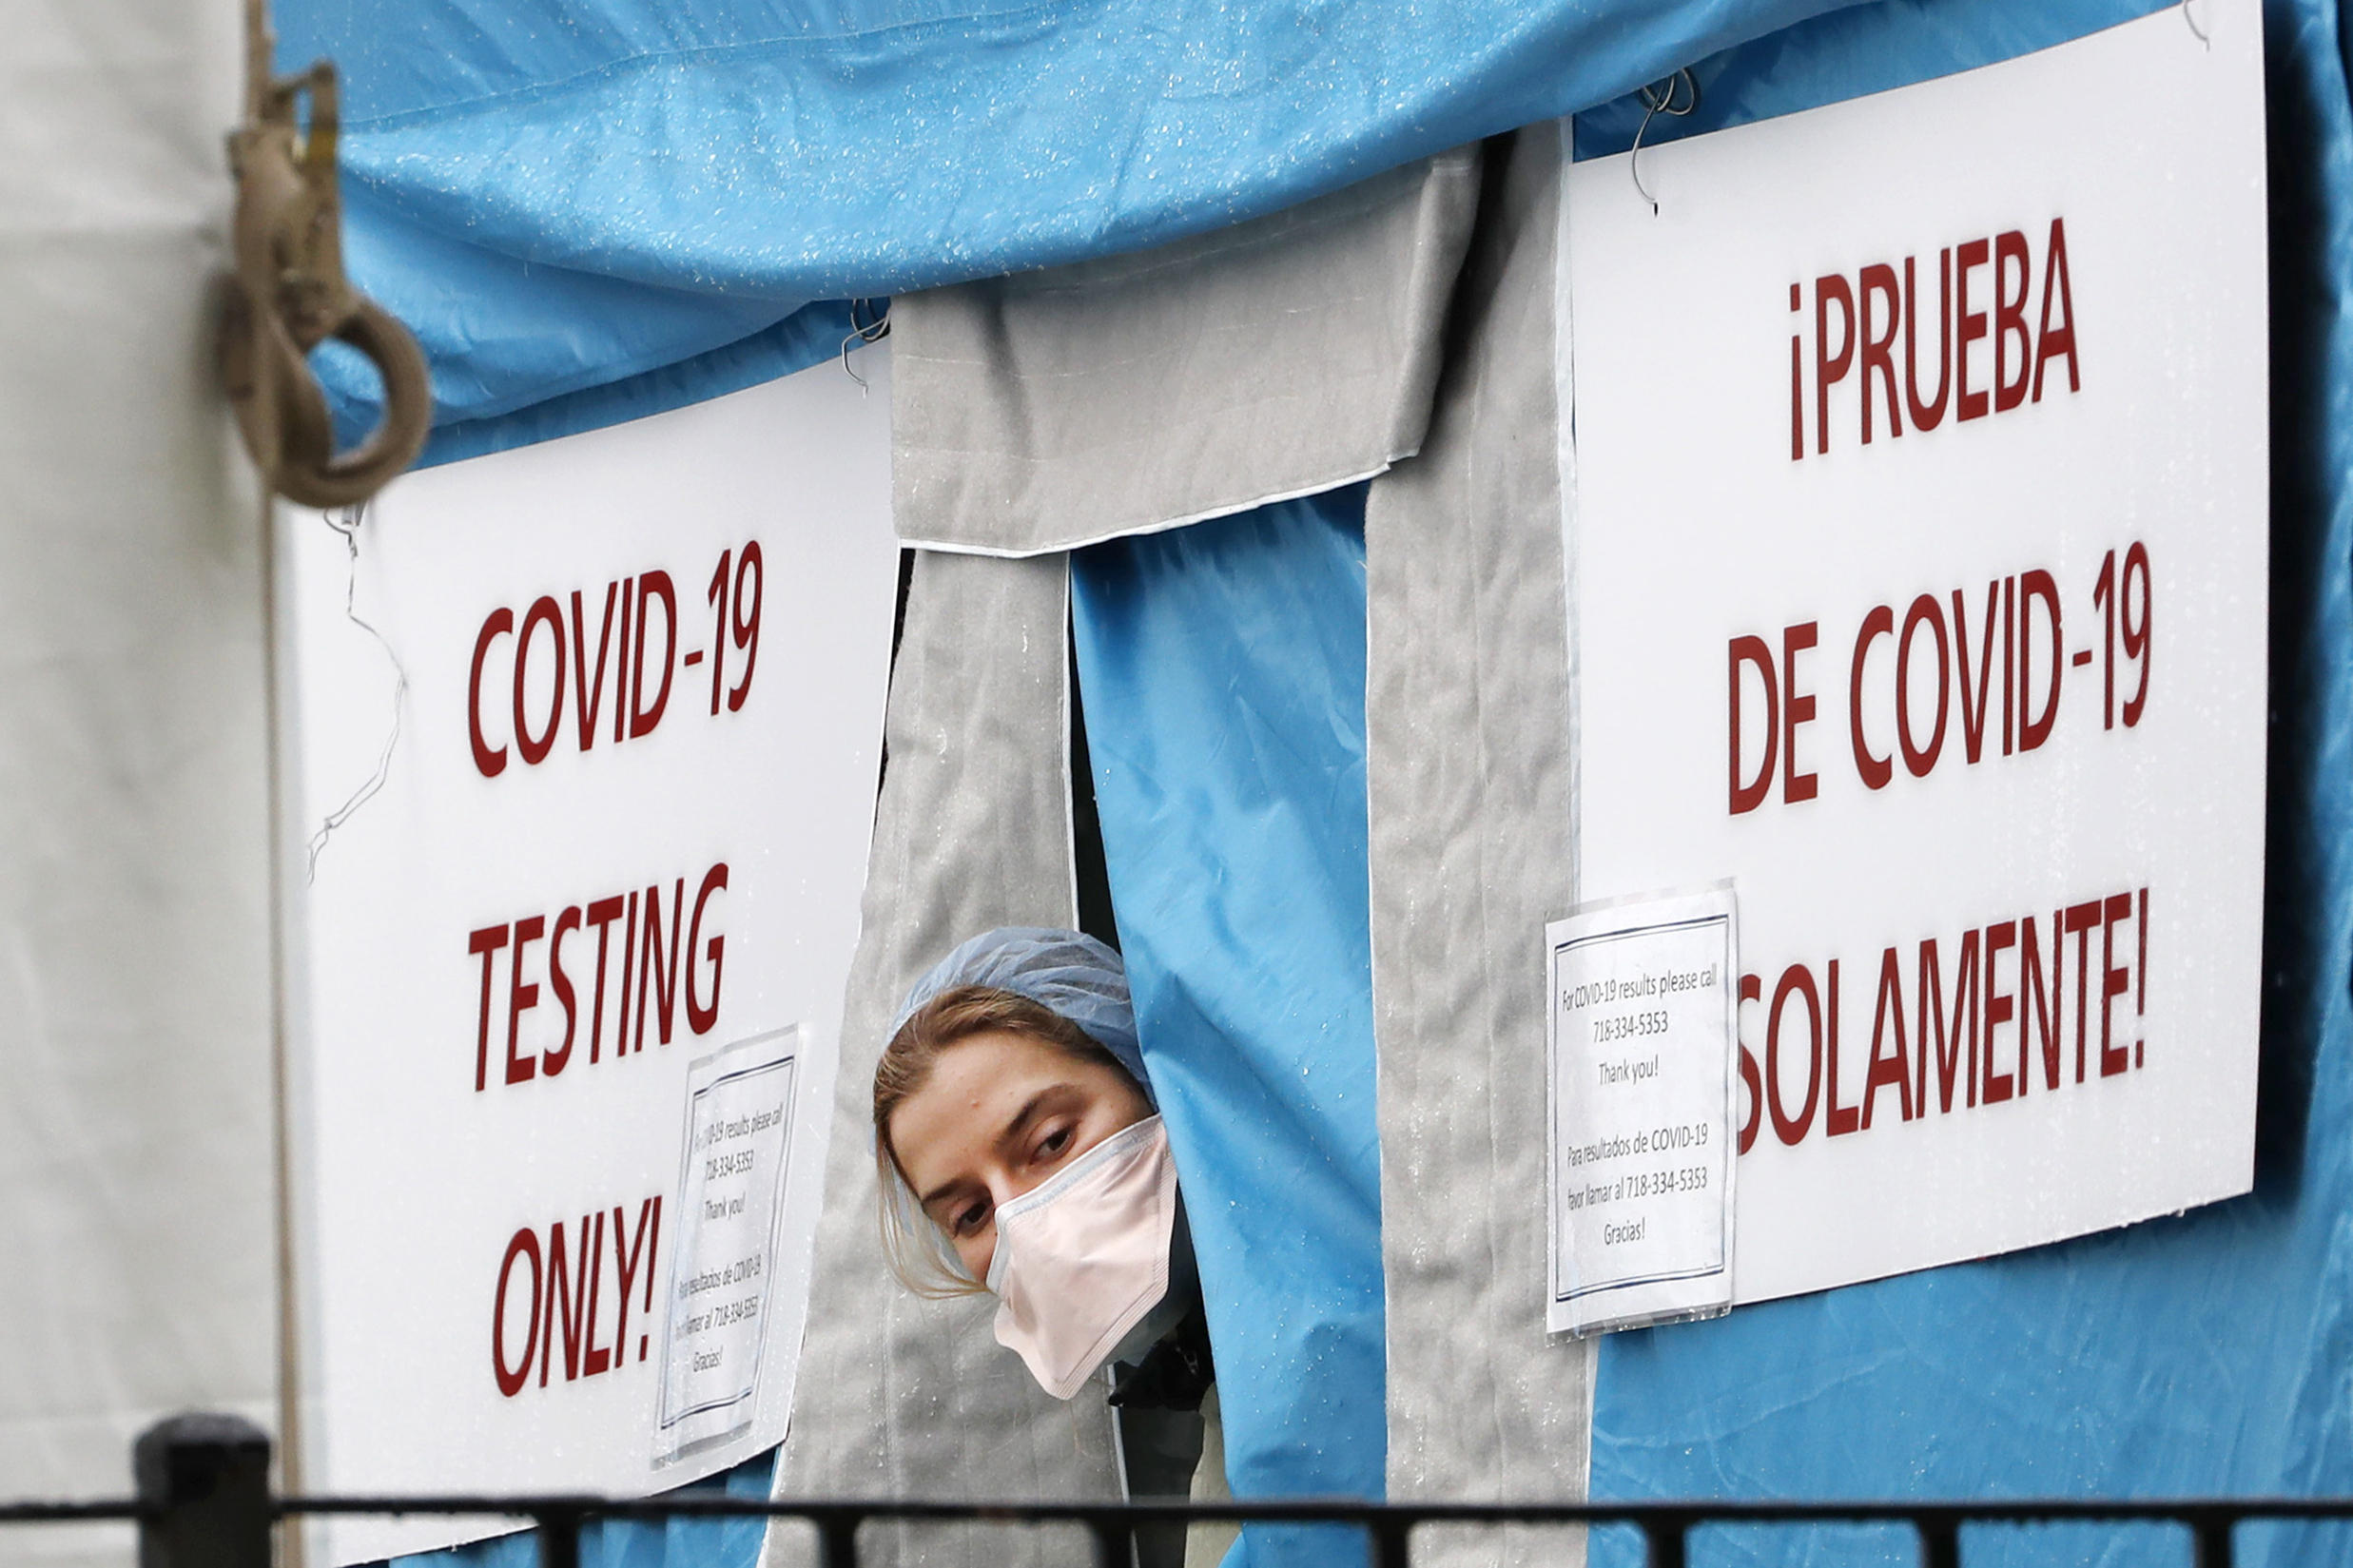 A medical worker sticks her head outside a COVID-19 testing tent